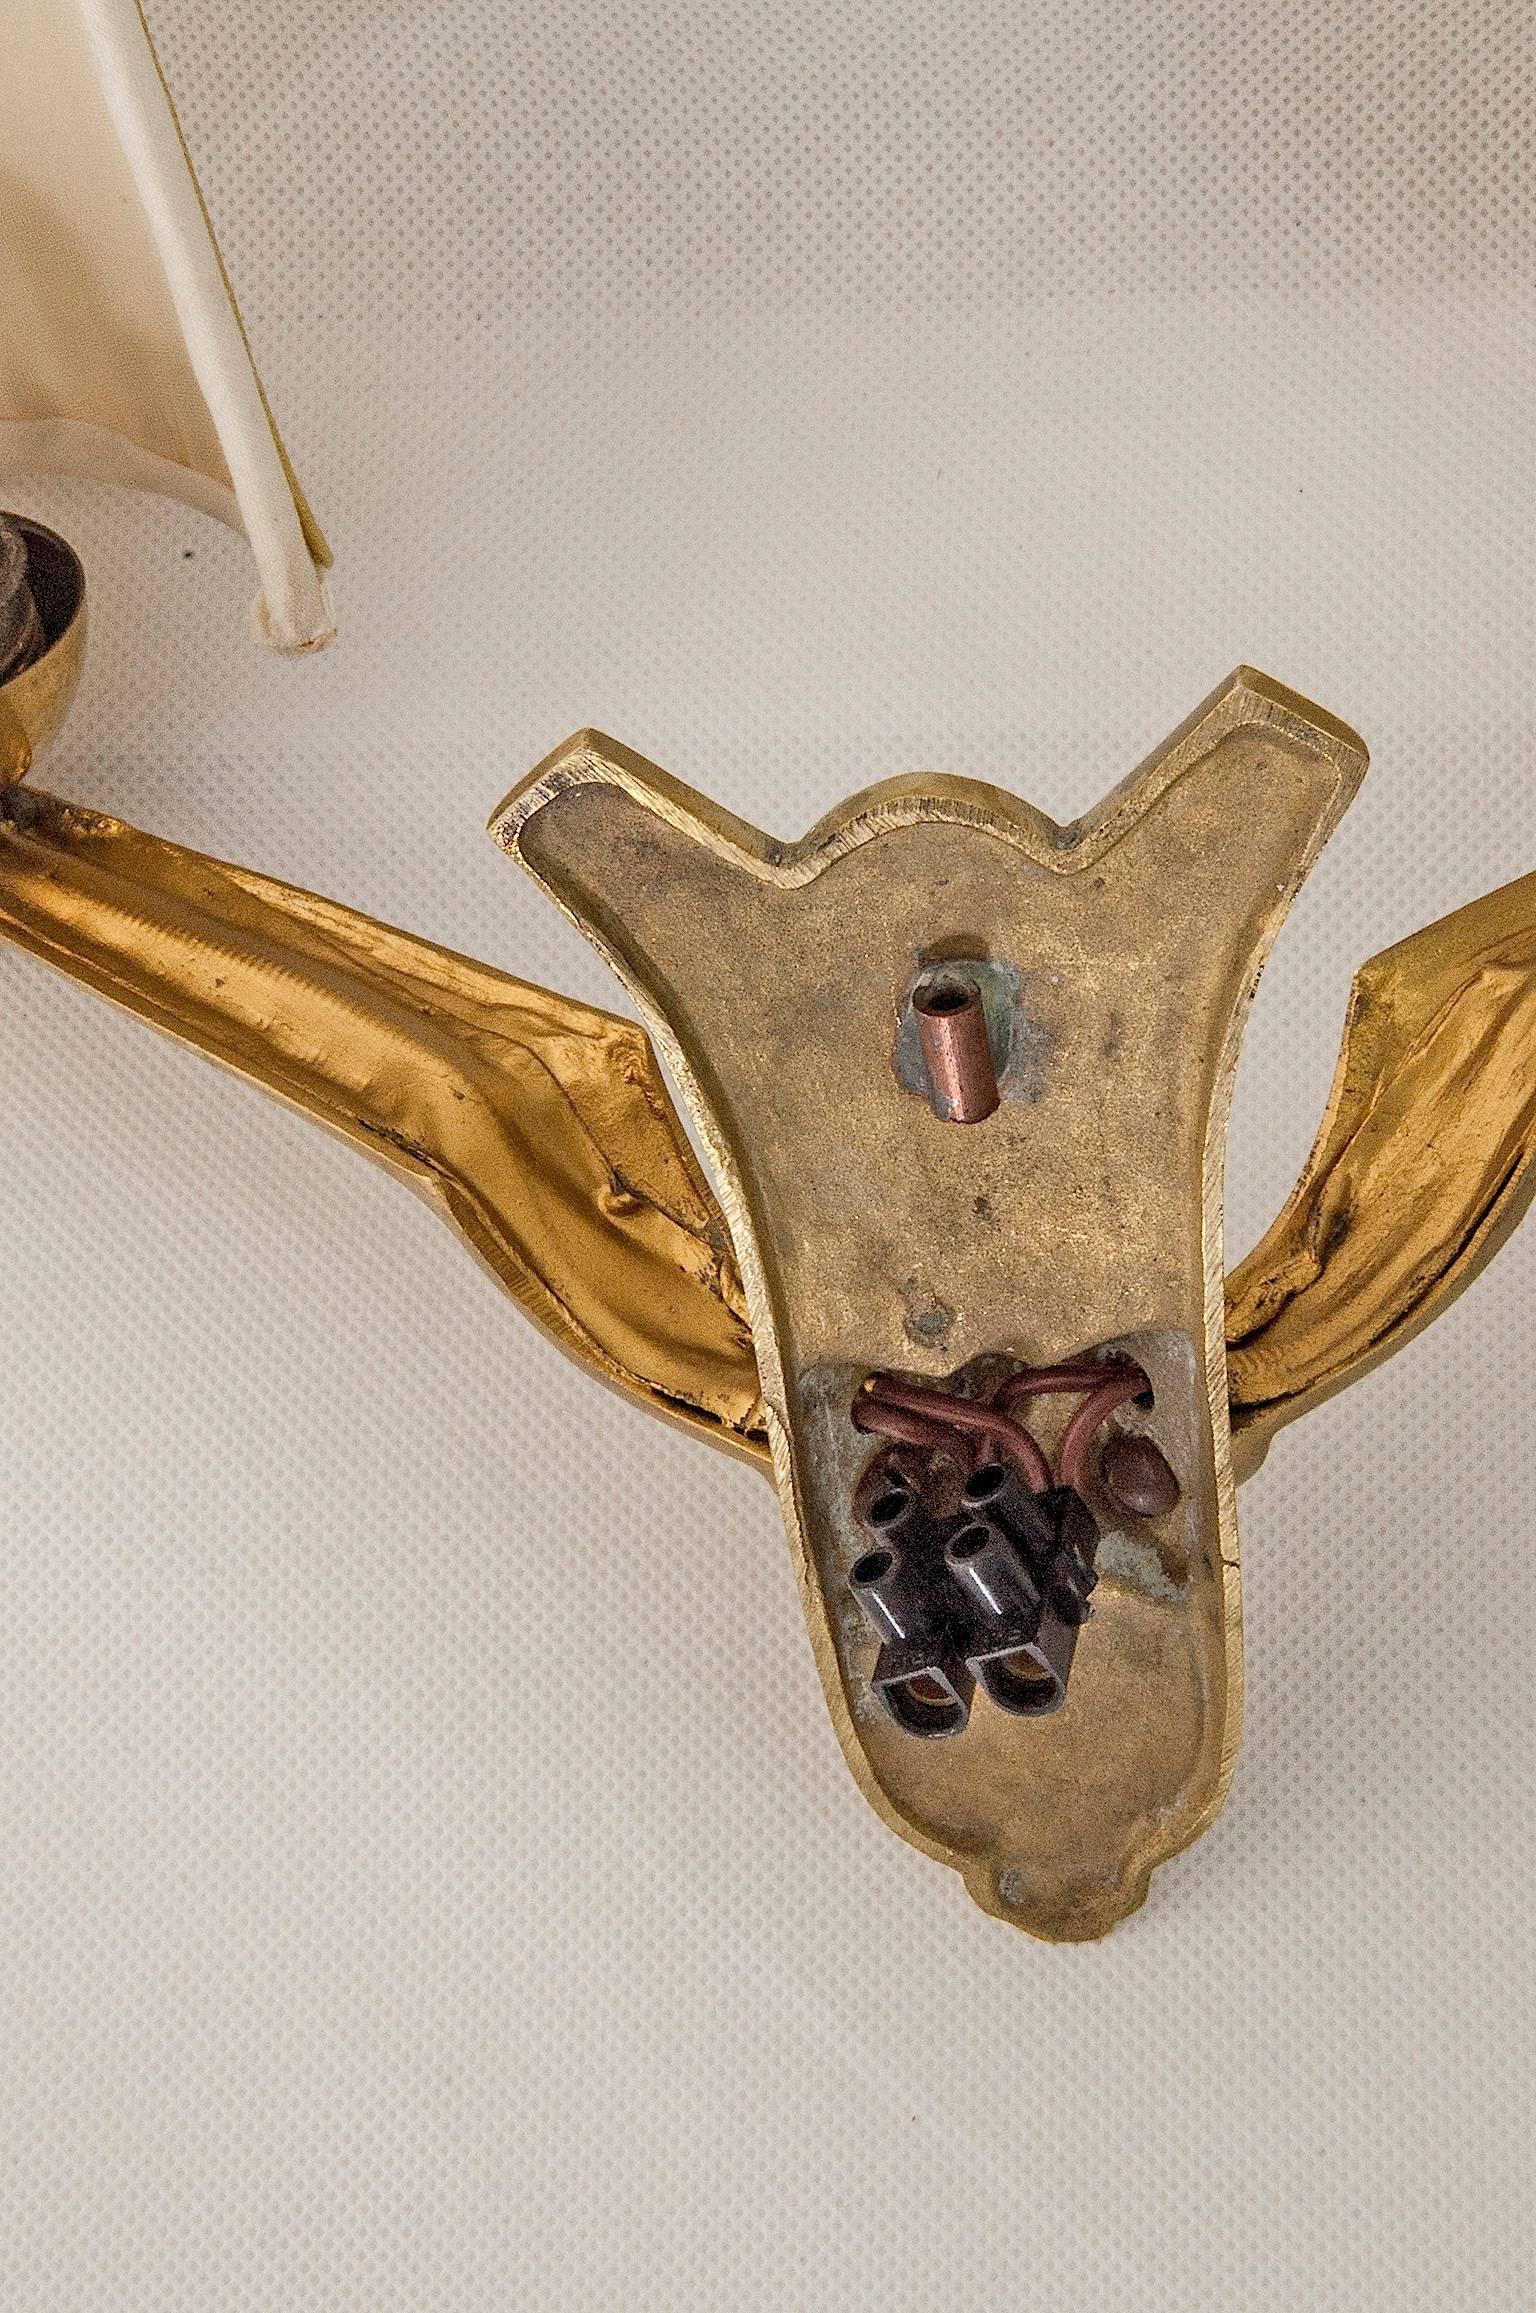 Jugendstil Vienna Sconce in Brass with Fabric Shades 3